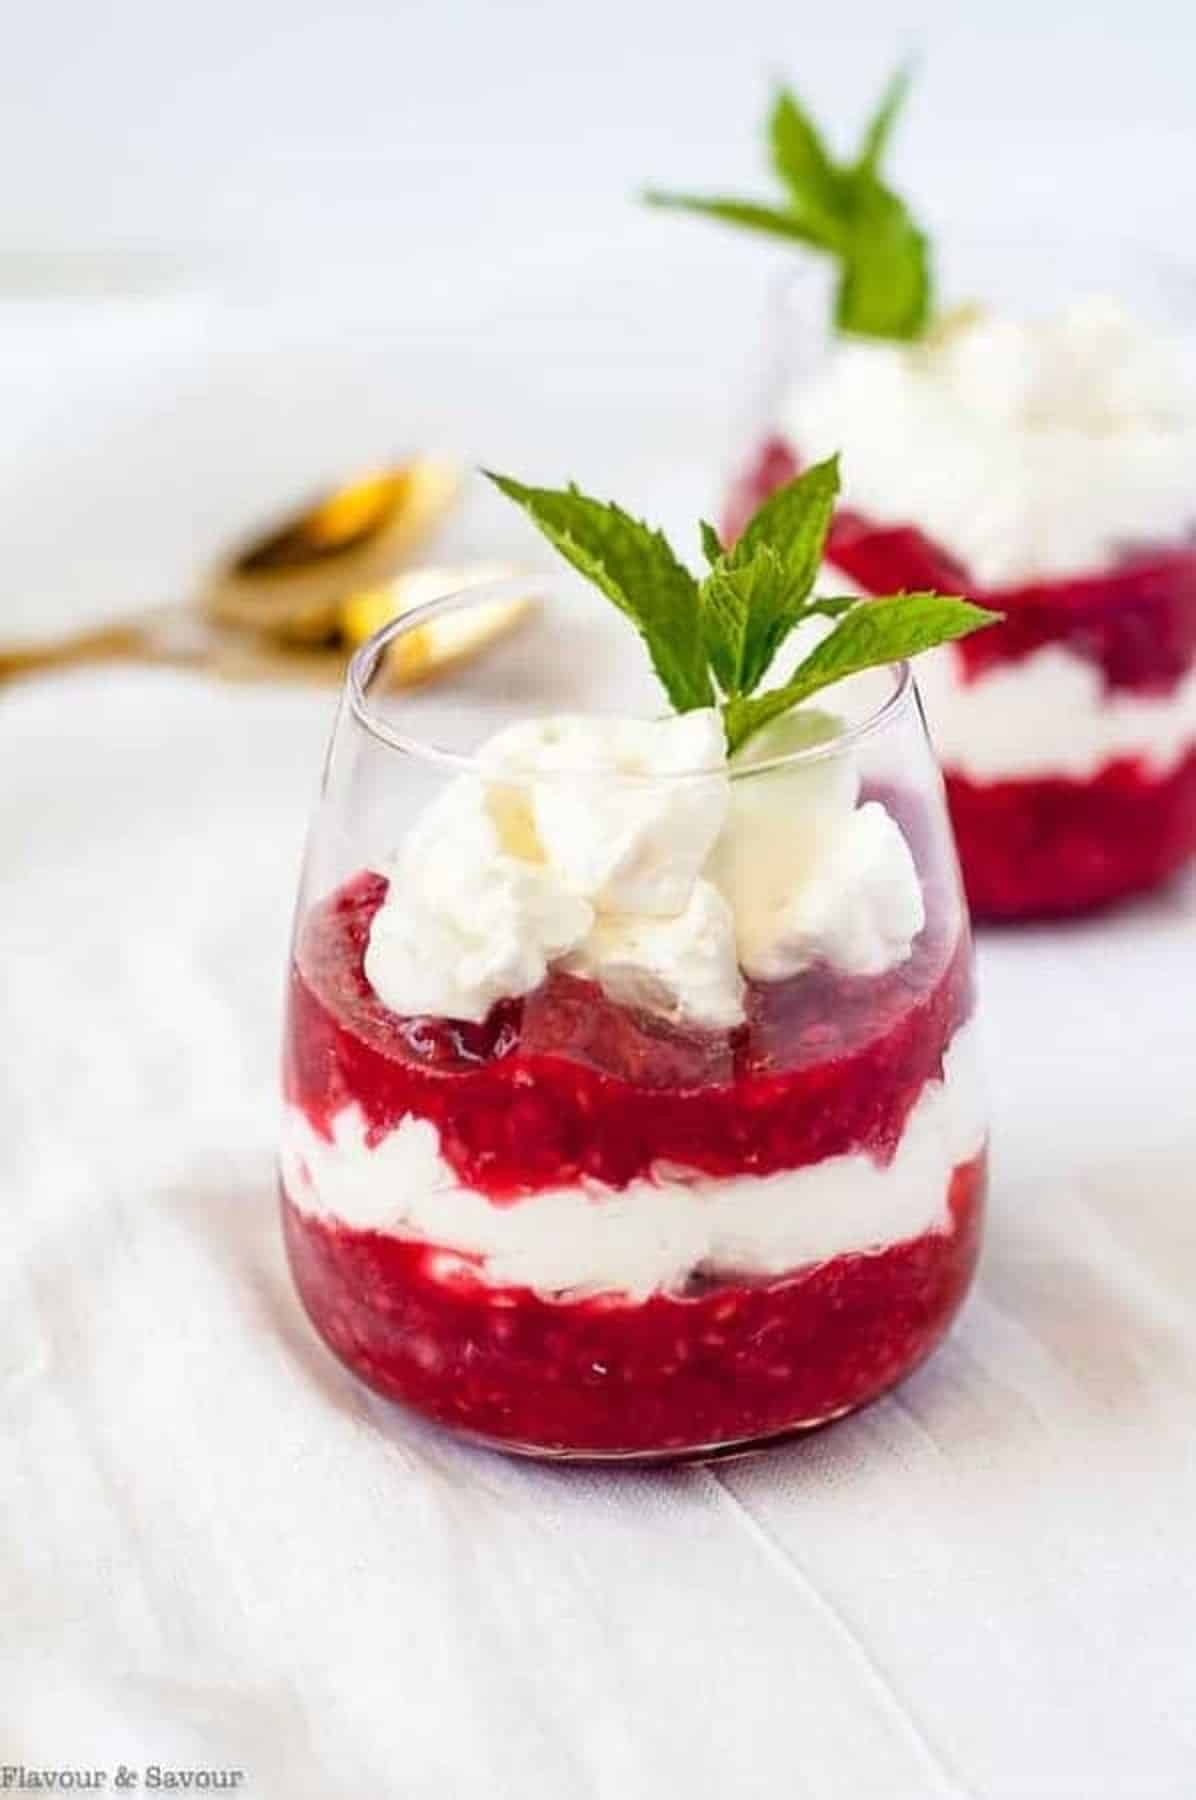 Easy Raspberry Rhubarb Fool Recipes in clear glasses with mint.